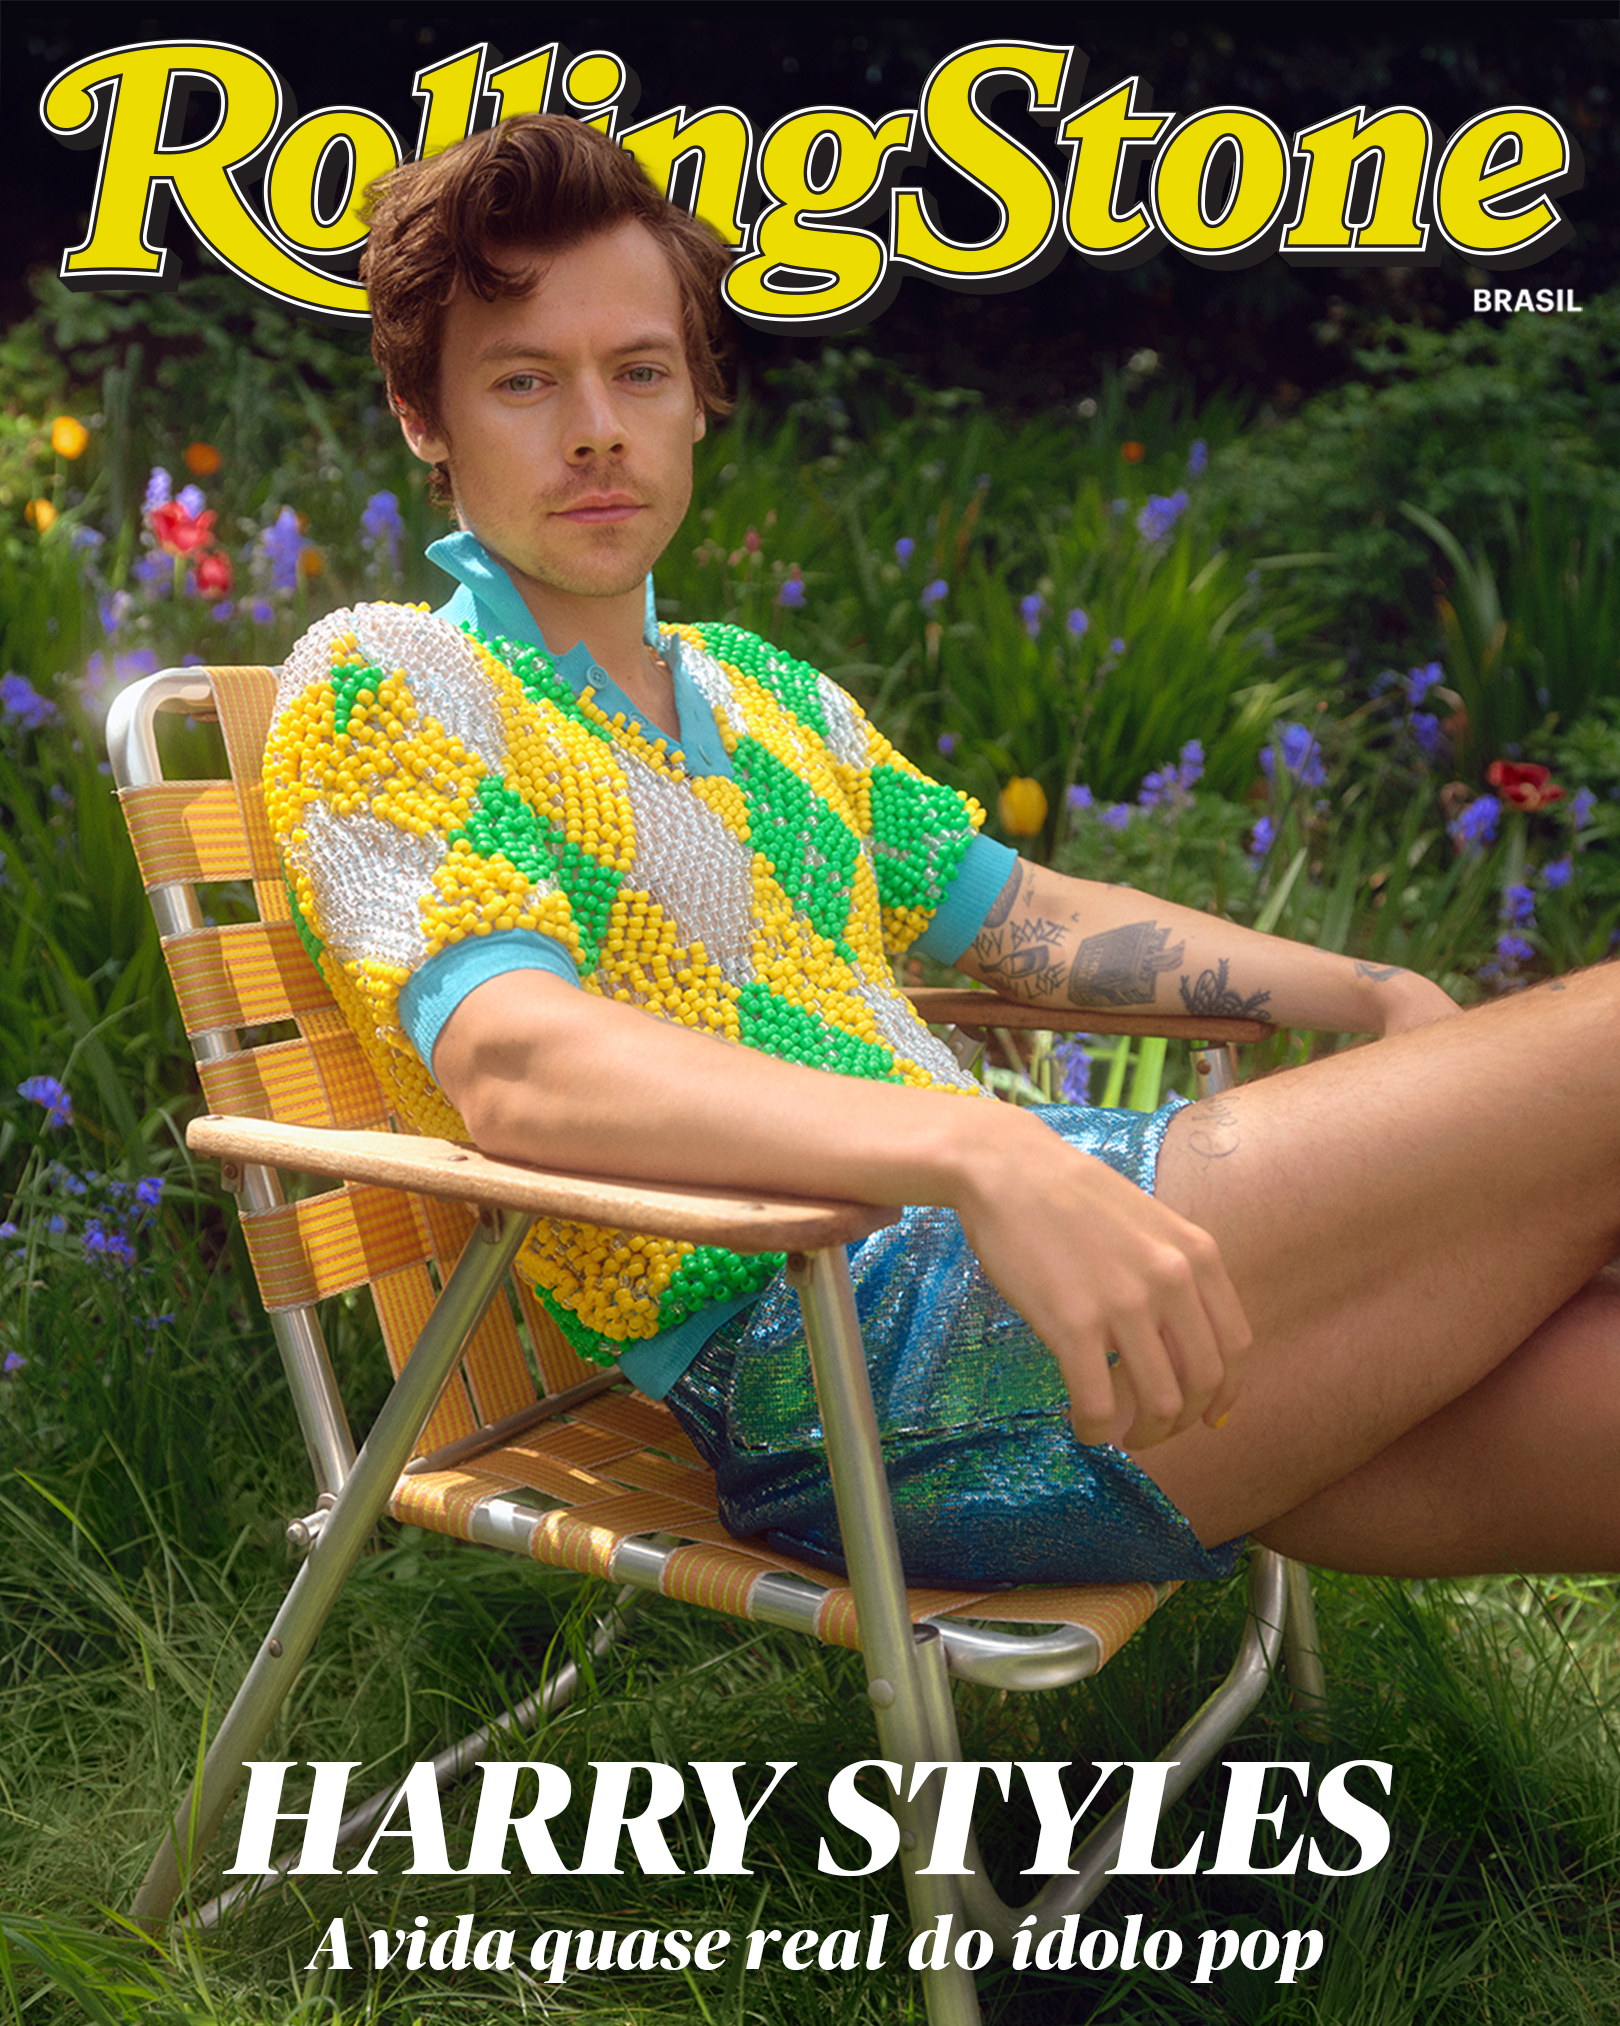 Harry Styles for Rolling Stone 